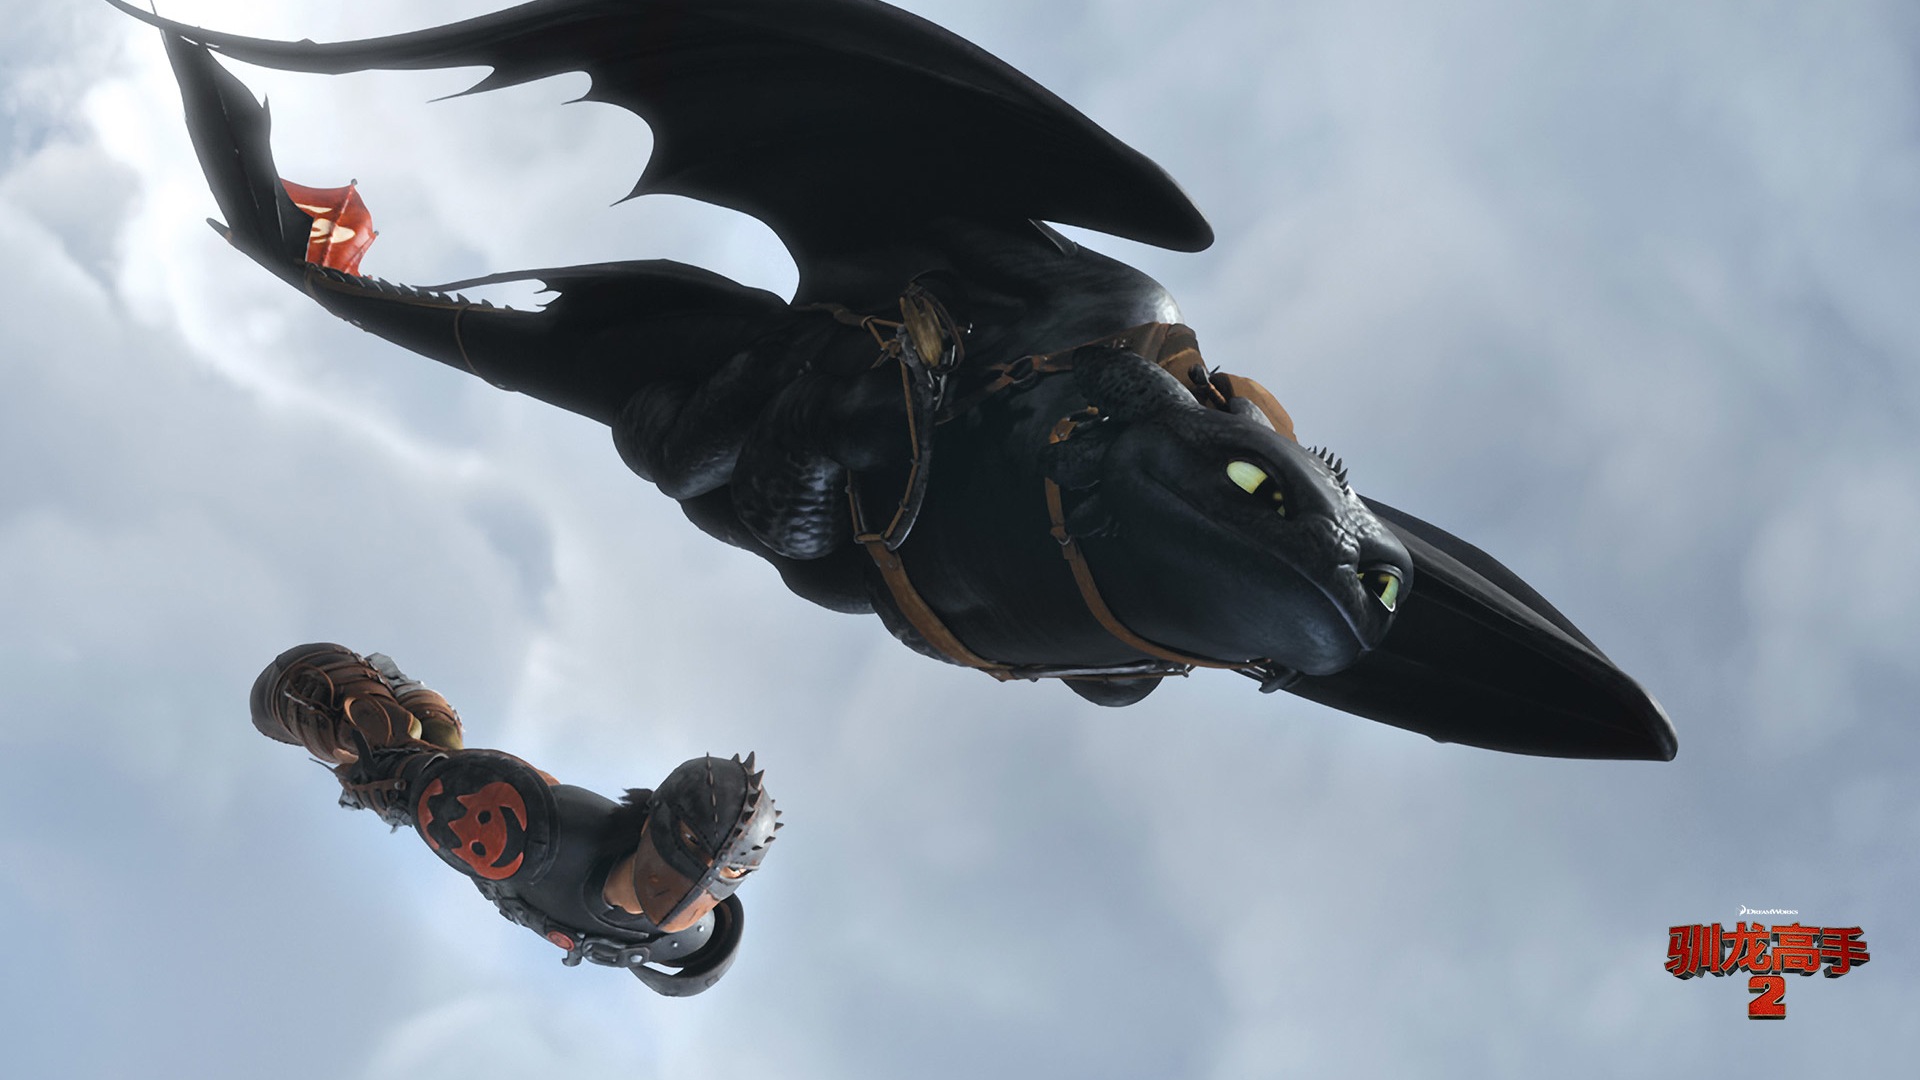 How to Train Your Dragon 2 驯龙高手2 高清壁纸6 - 1920x1080